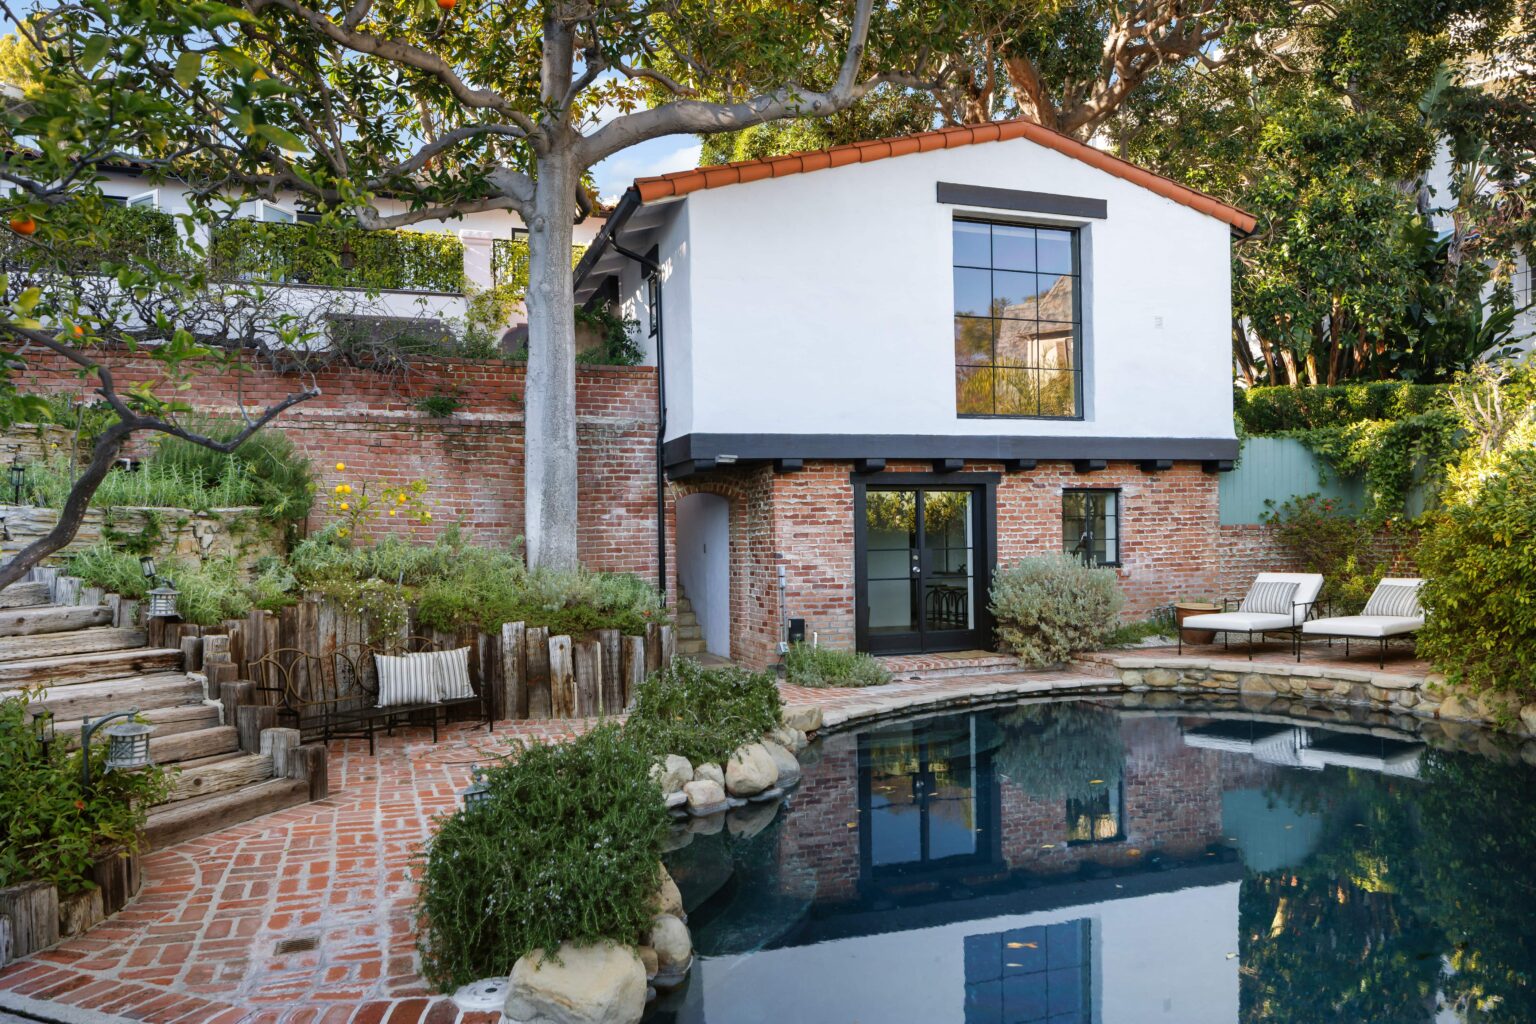 Queen drummer Roger Taylor lists his meticulously restored Spanish-style mansion in central Los Angeles for $6 million. The 1933 home boasts 4 bedrooms, 5 bathrooms, and lush outdoor amenities, offering a serene retreat in bustling LA.